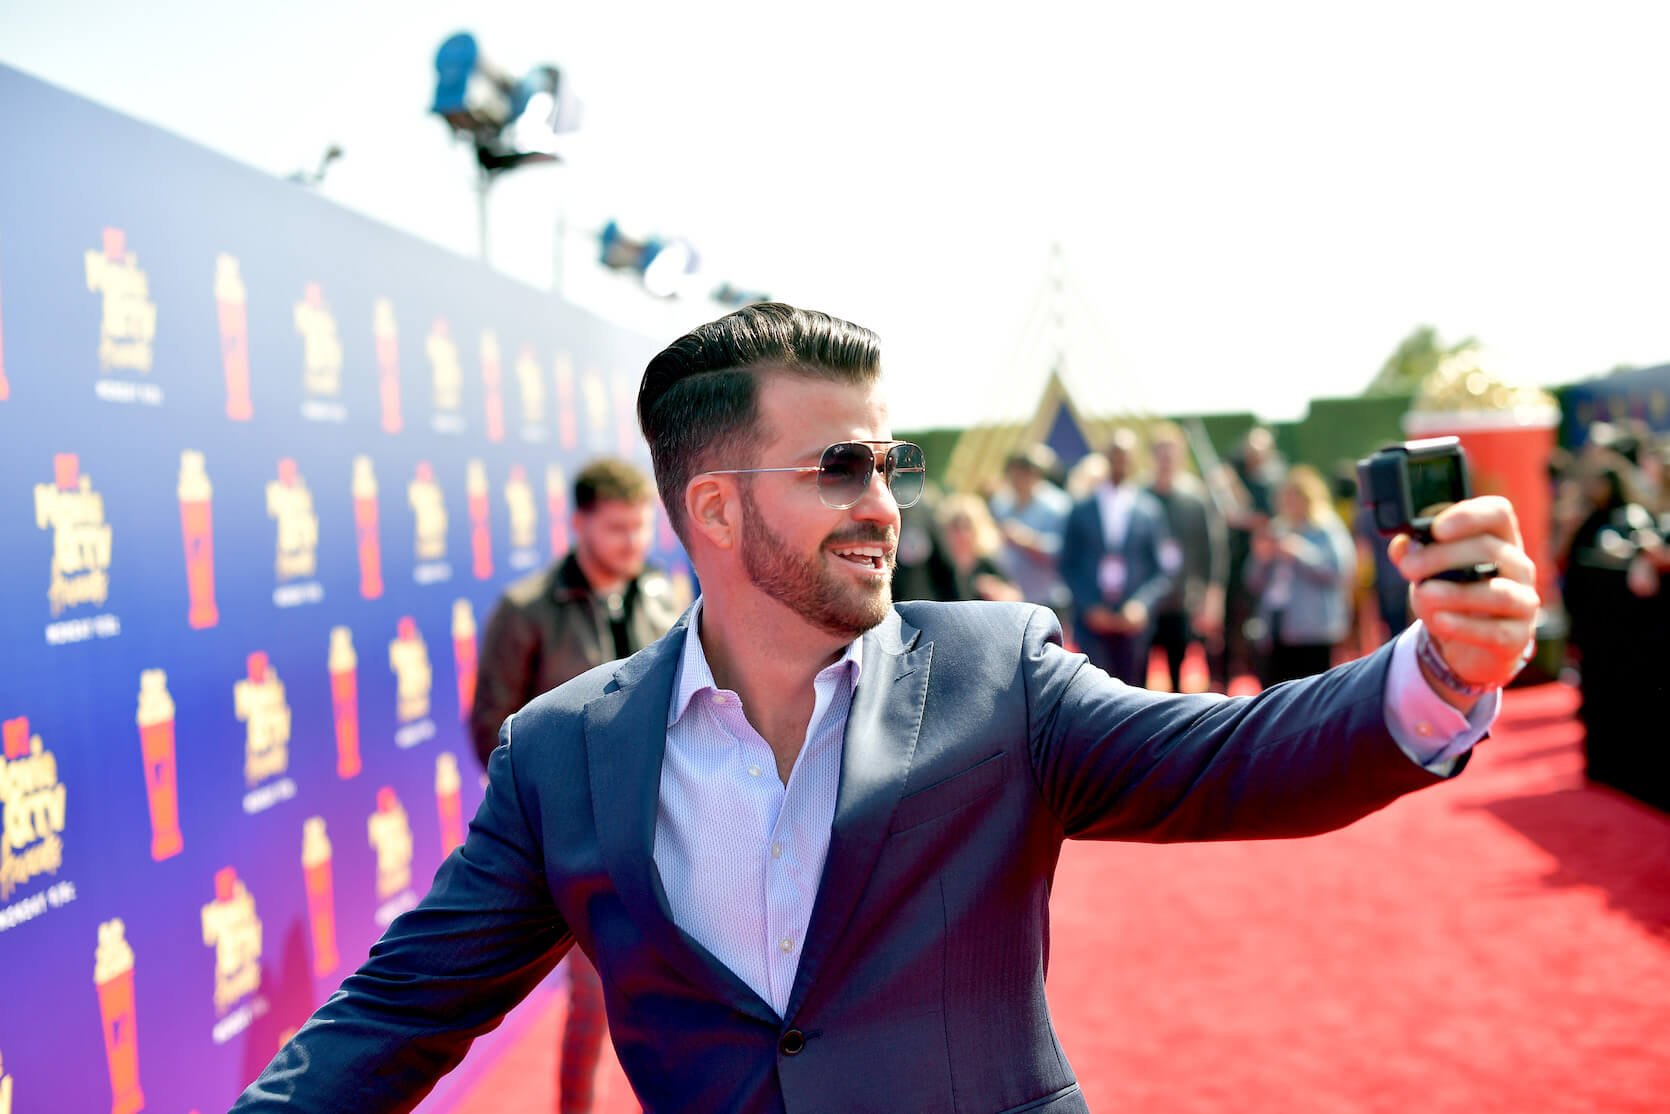 Johnny 'Bananas' Devenanzio from MTV's 'The Challenge' taking a selfie on the red carpet while wearing a suit and sunglasses.